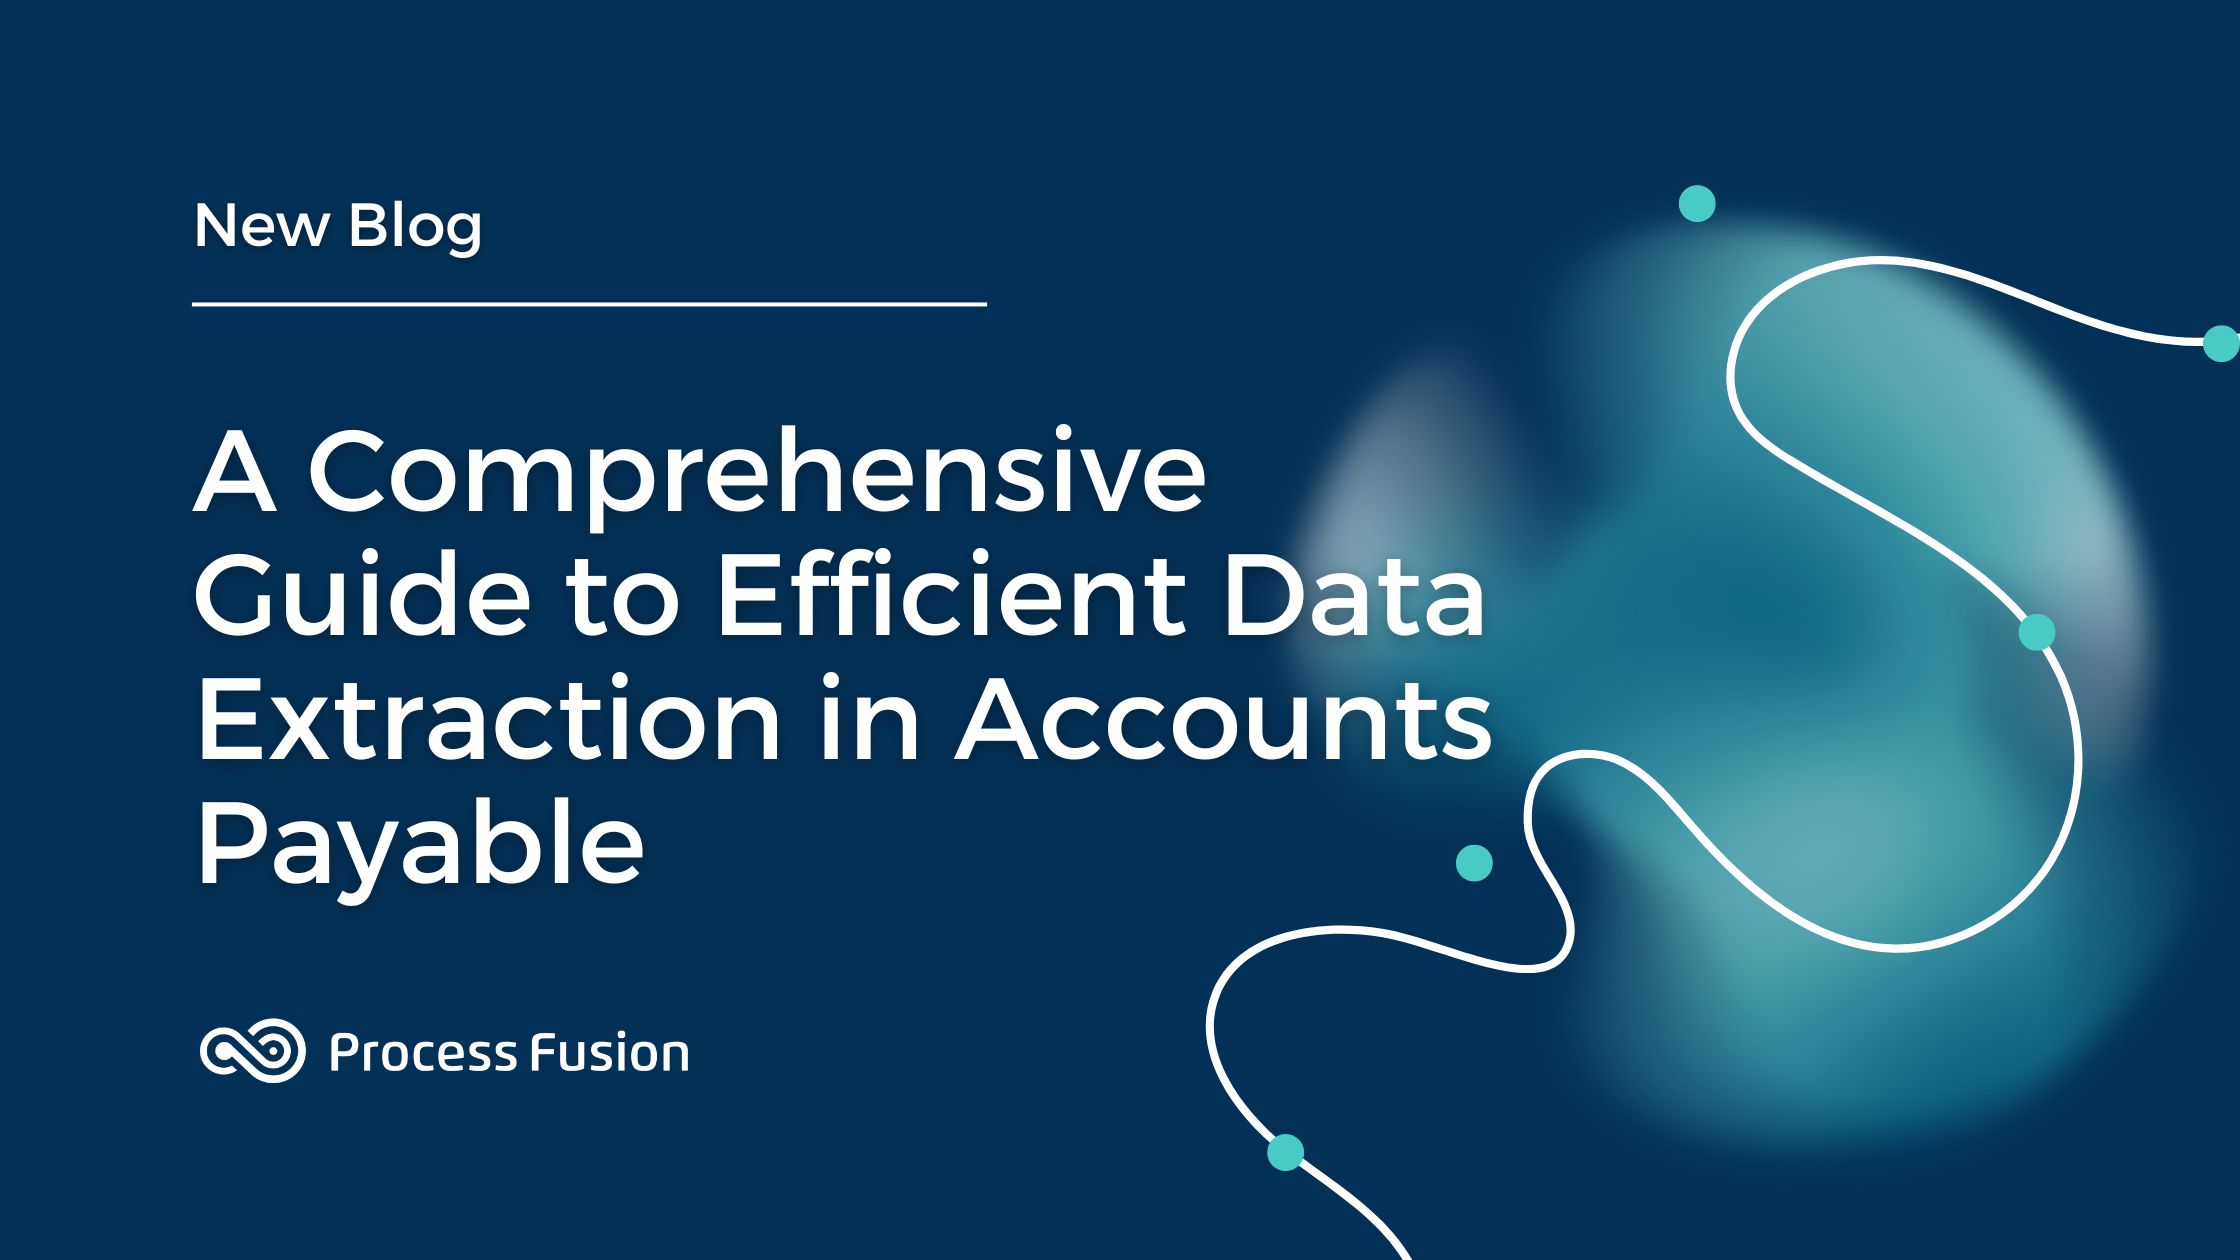 Efficient Data Extraction in Accounts Payable